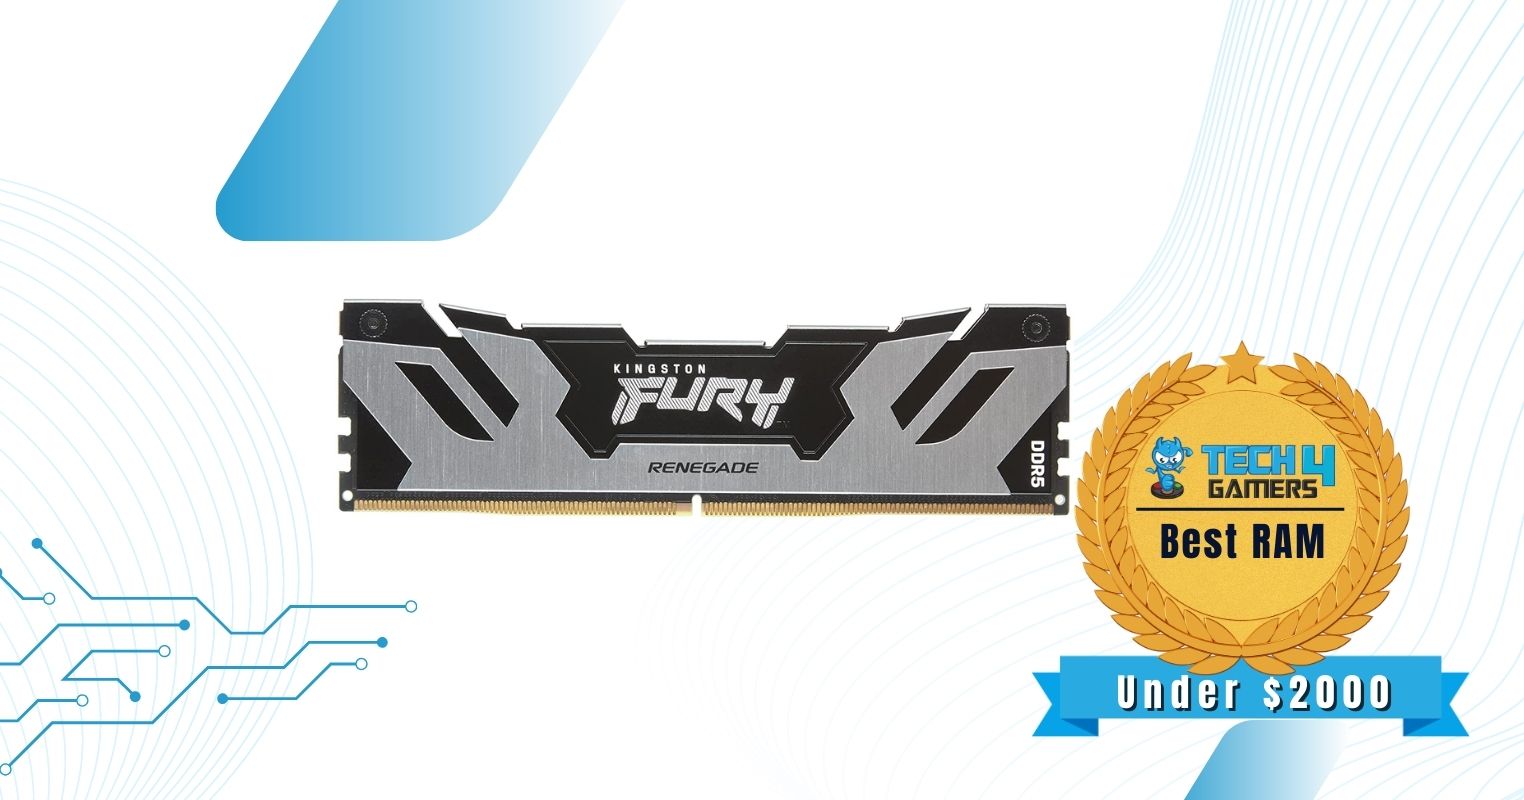 Best Gaming PC Under $2000 RAM - Kingston Fury Renegade 6400MTs CL32 32GB DDR5